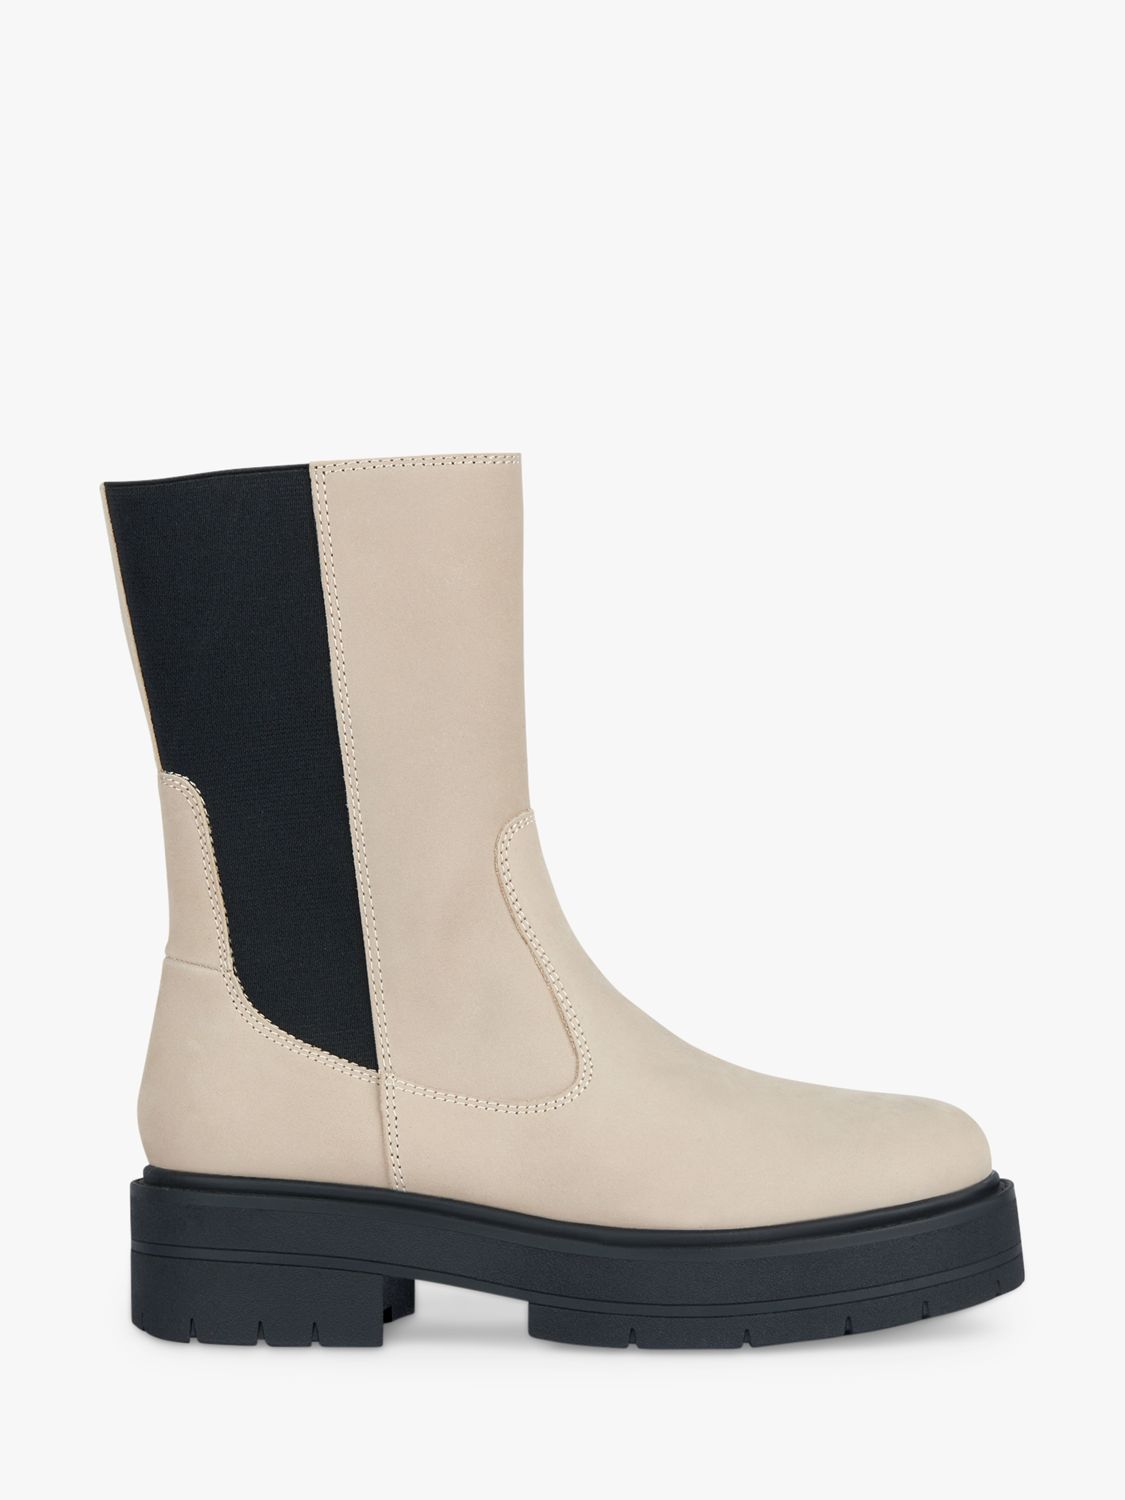 Geox D Spherica EC7 Ankle Boot, Sand at John Lewis & Partners